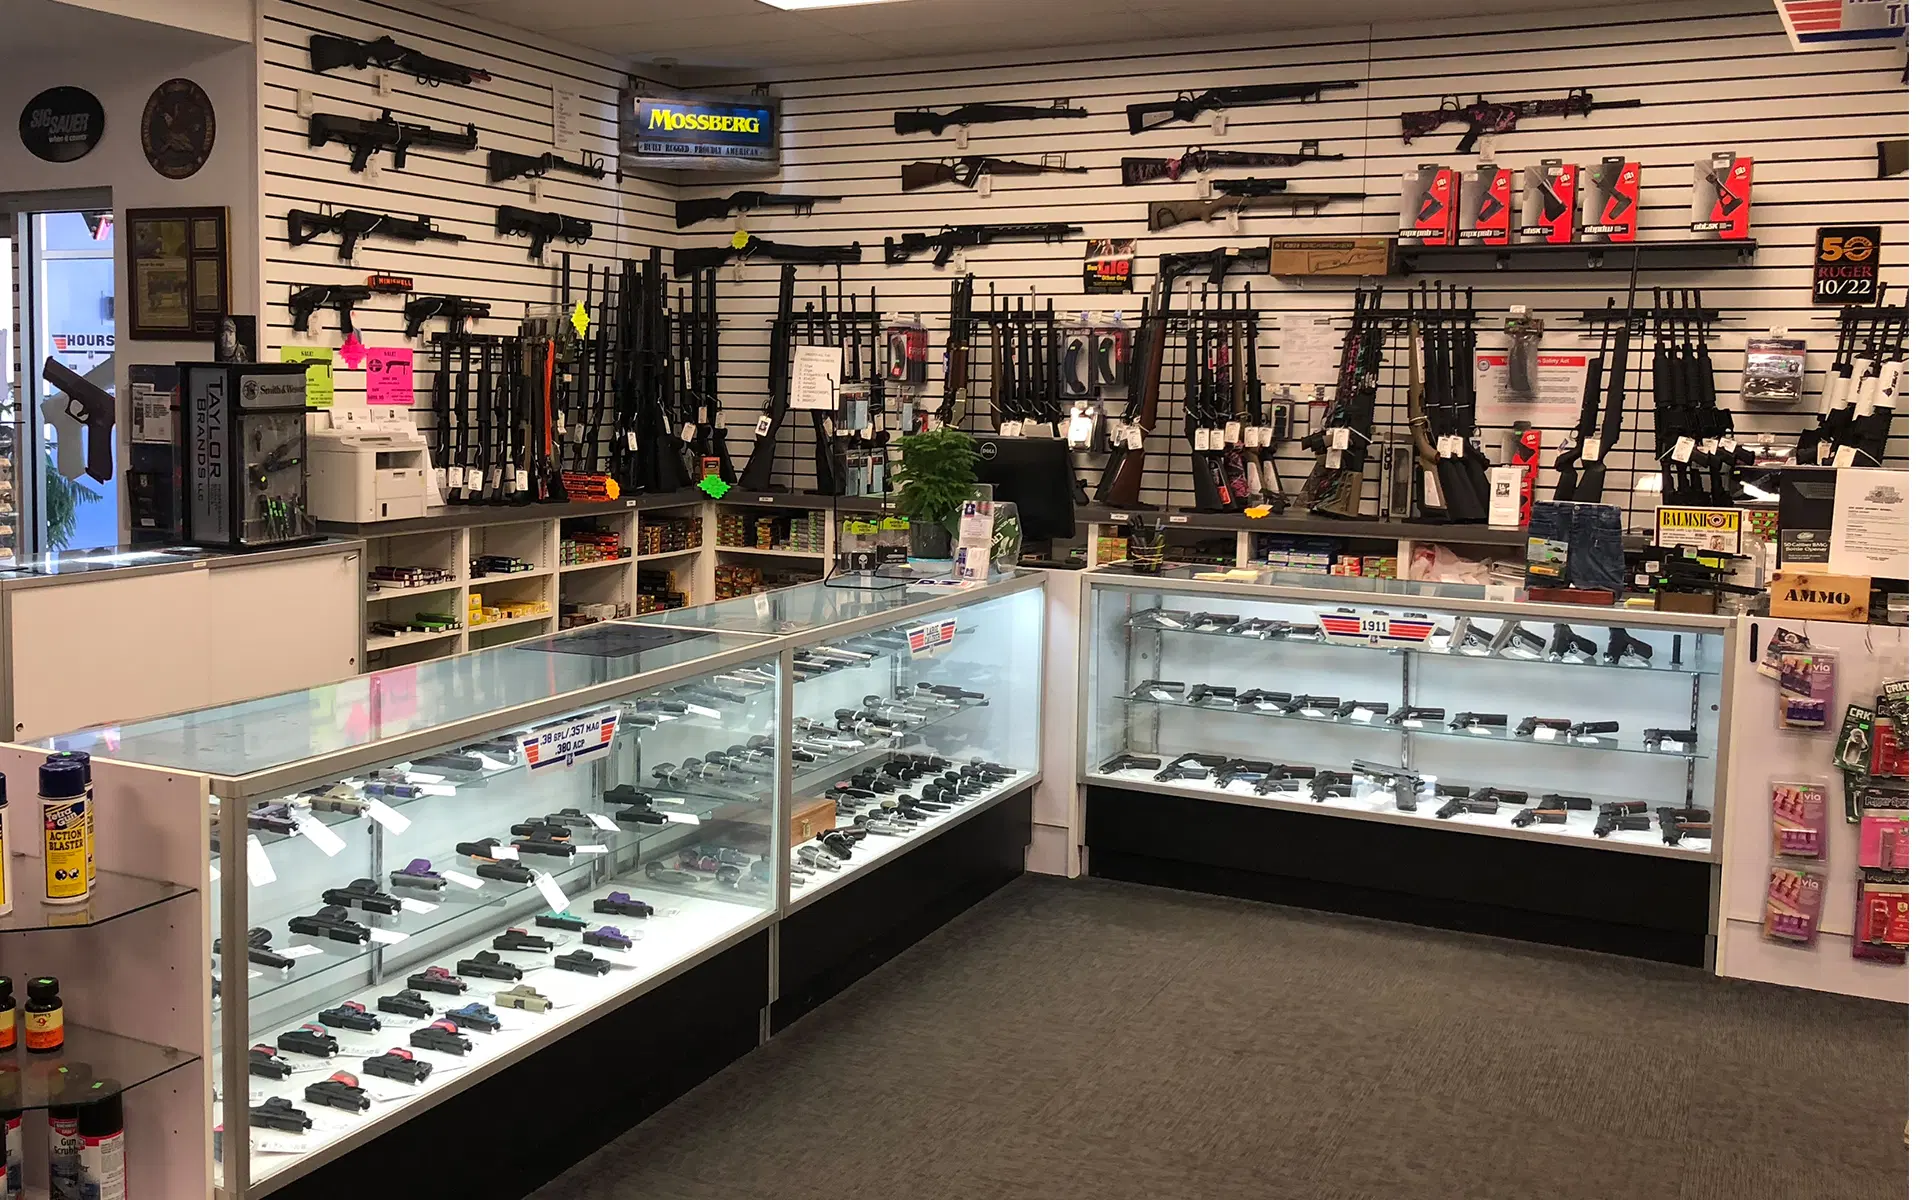 The Best Gun Store POS System